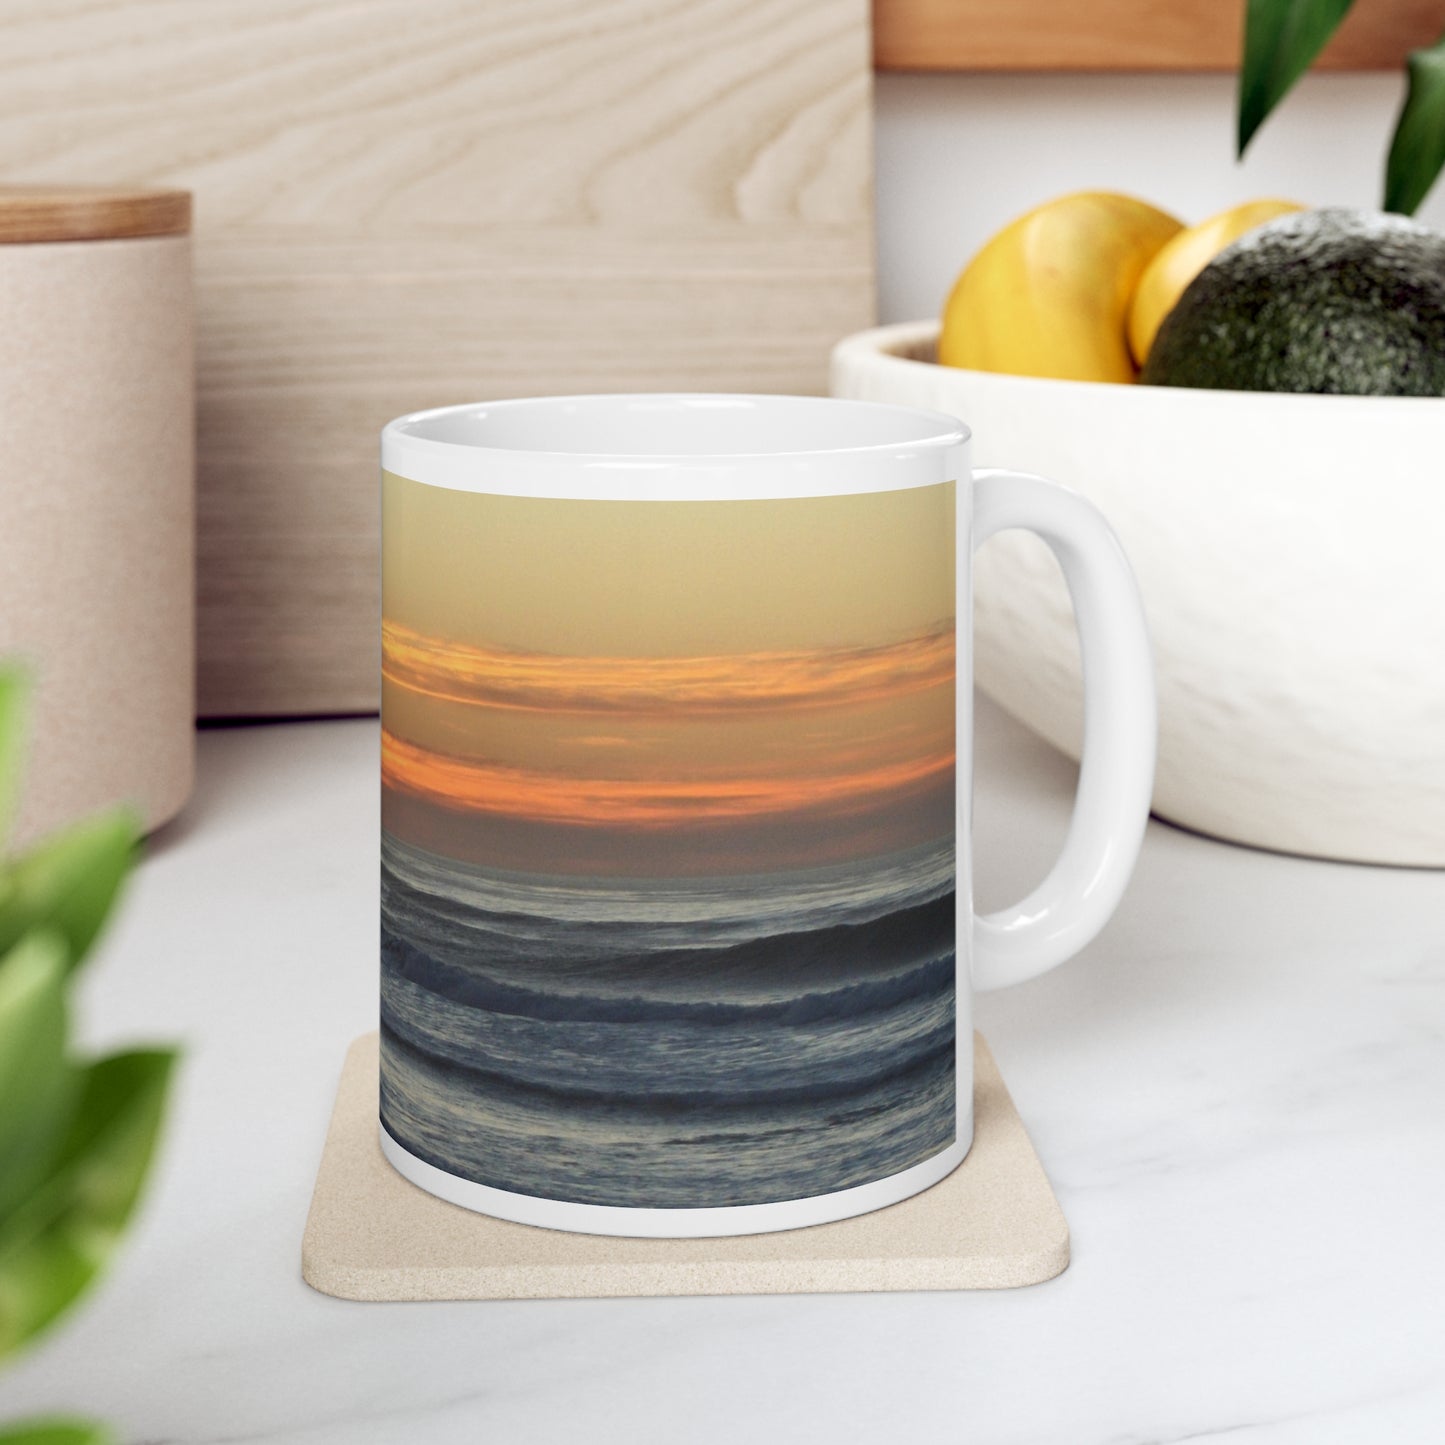 Mock up of the right side of the mug on a coaster in a kitchen 